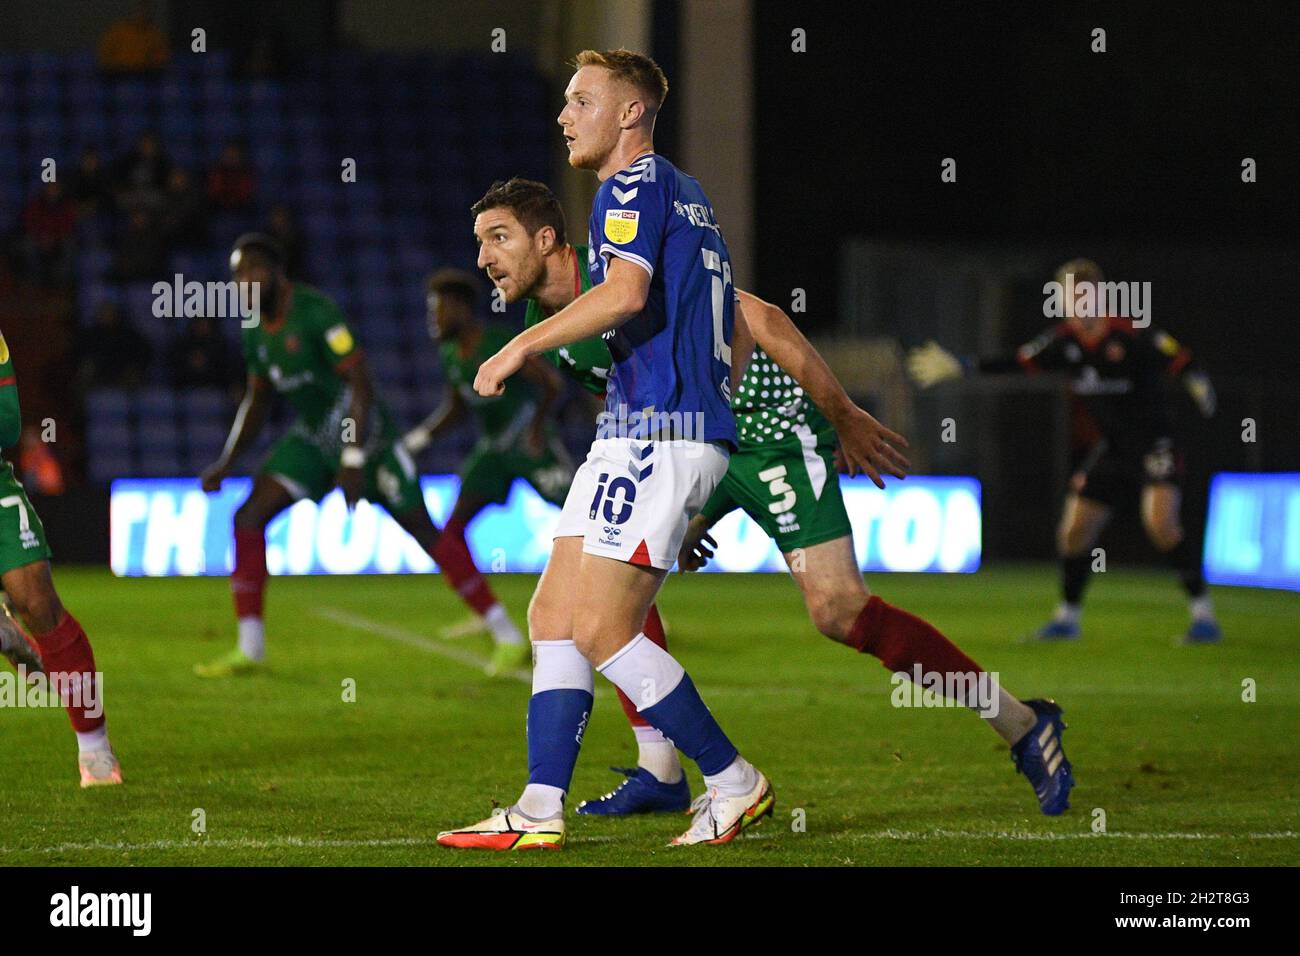 Oldham Athletic's no.10 Keillor-Dunn.Picture: Liam Ford/AHPIX LTD, Football, EFL League 2, Oldham Athletic v Walsall FC, Boundary Park, Oldham, UK, 19 Stock Photo